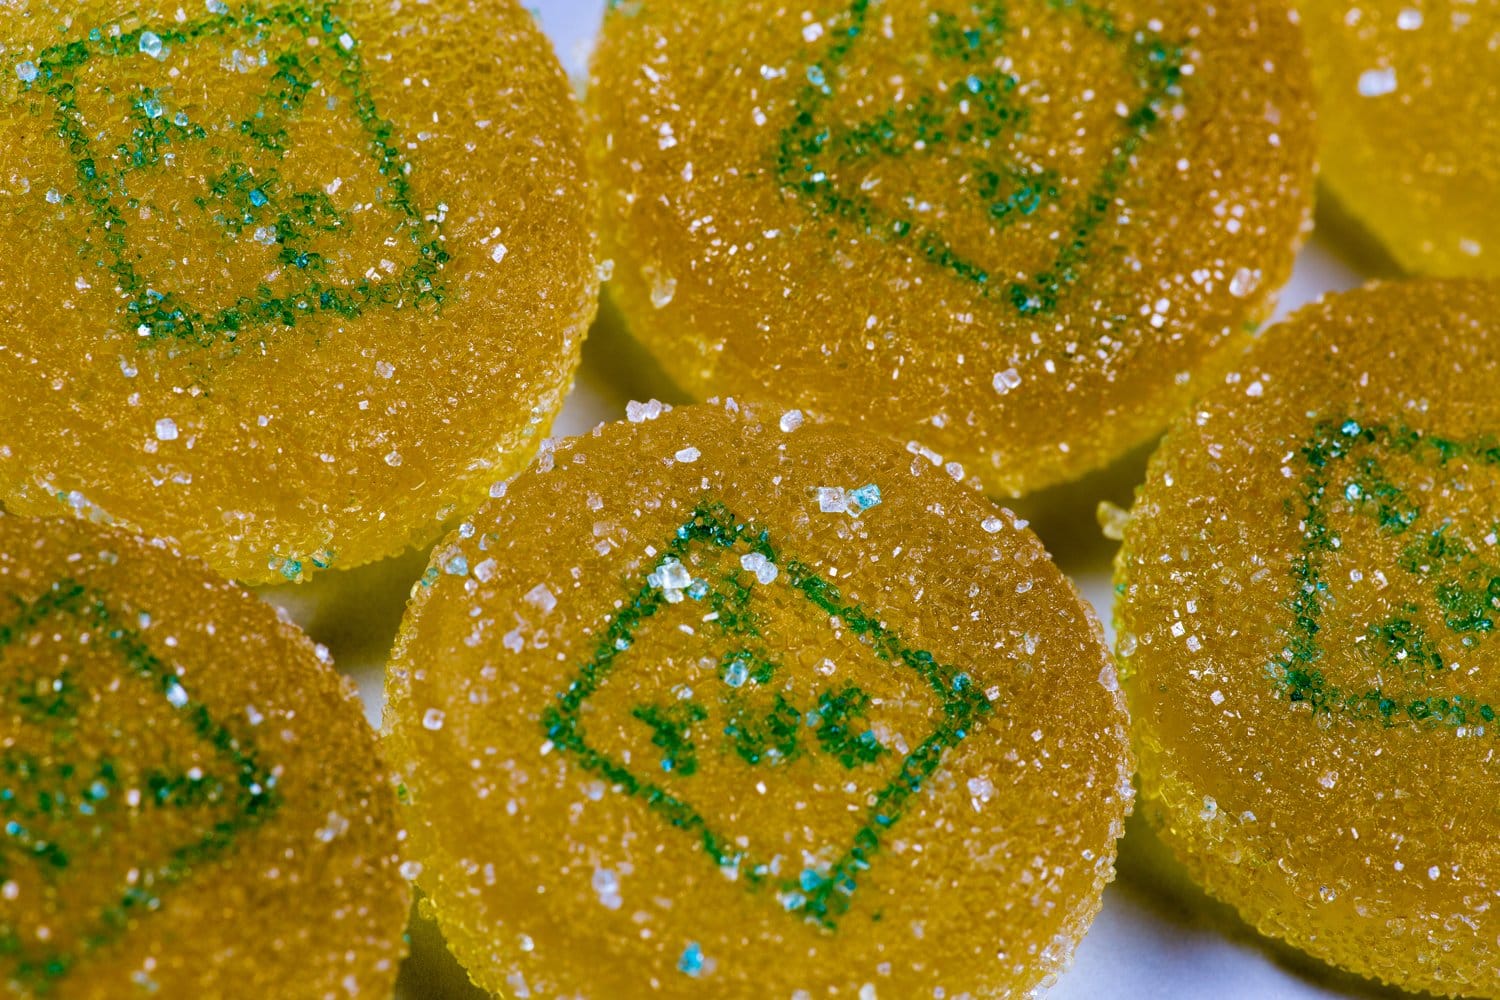 Beginner’s Guide To Edibles: Where to buy Them & How To Make Them